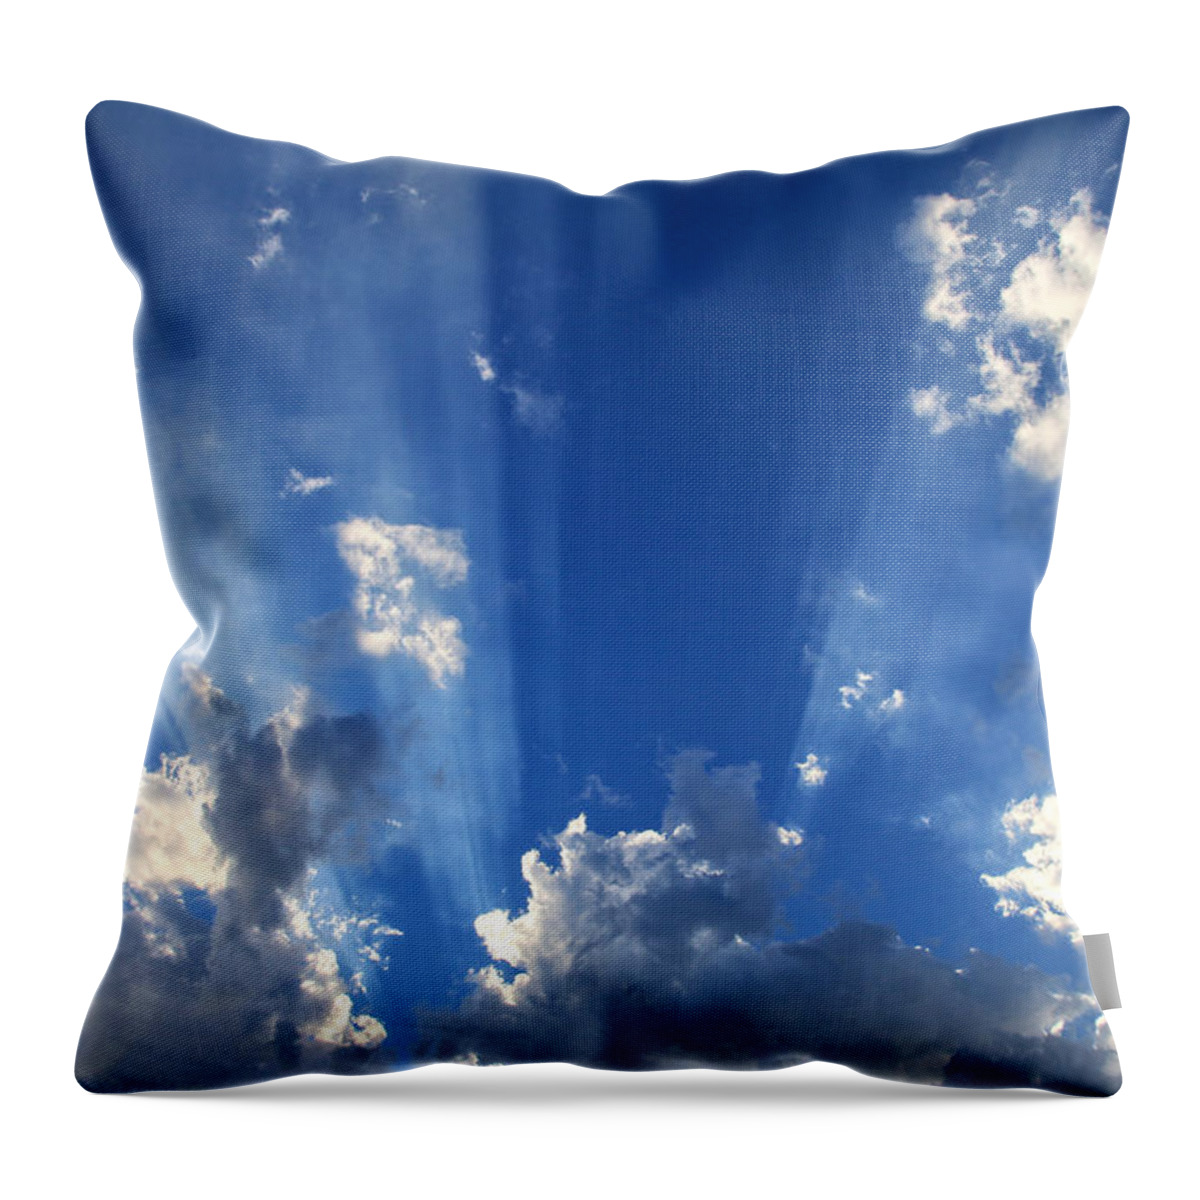 Heavenly Light Throw Pillow featuring the photograph Heavenly Light by Nina Prommer